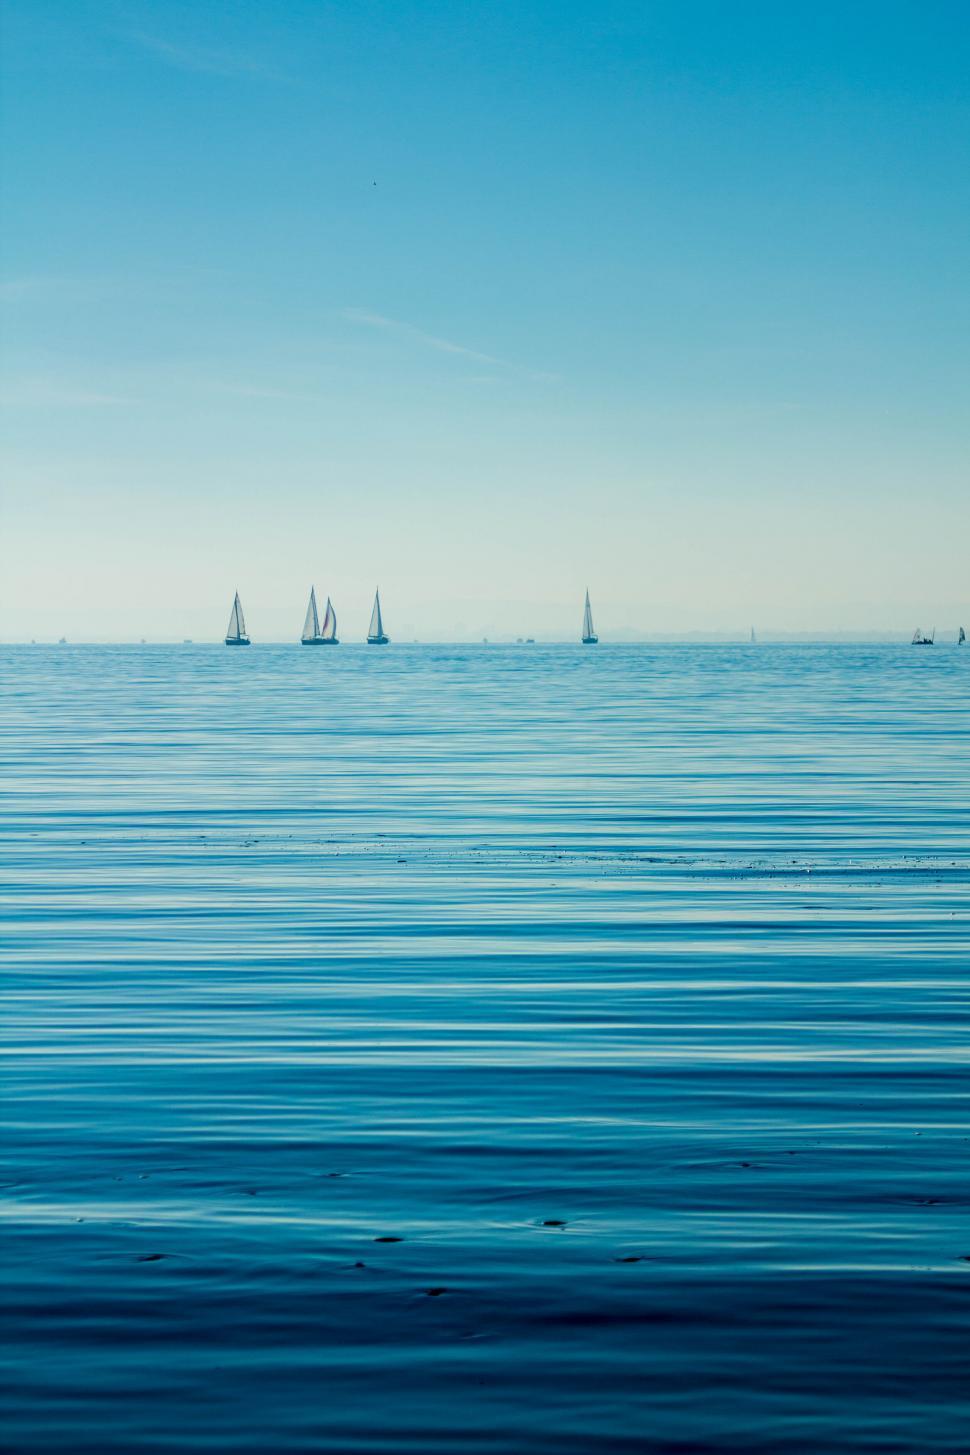 Free Image of Serenity on a calm sea with sailboats 